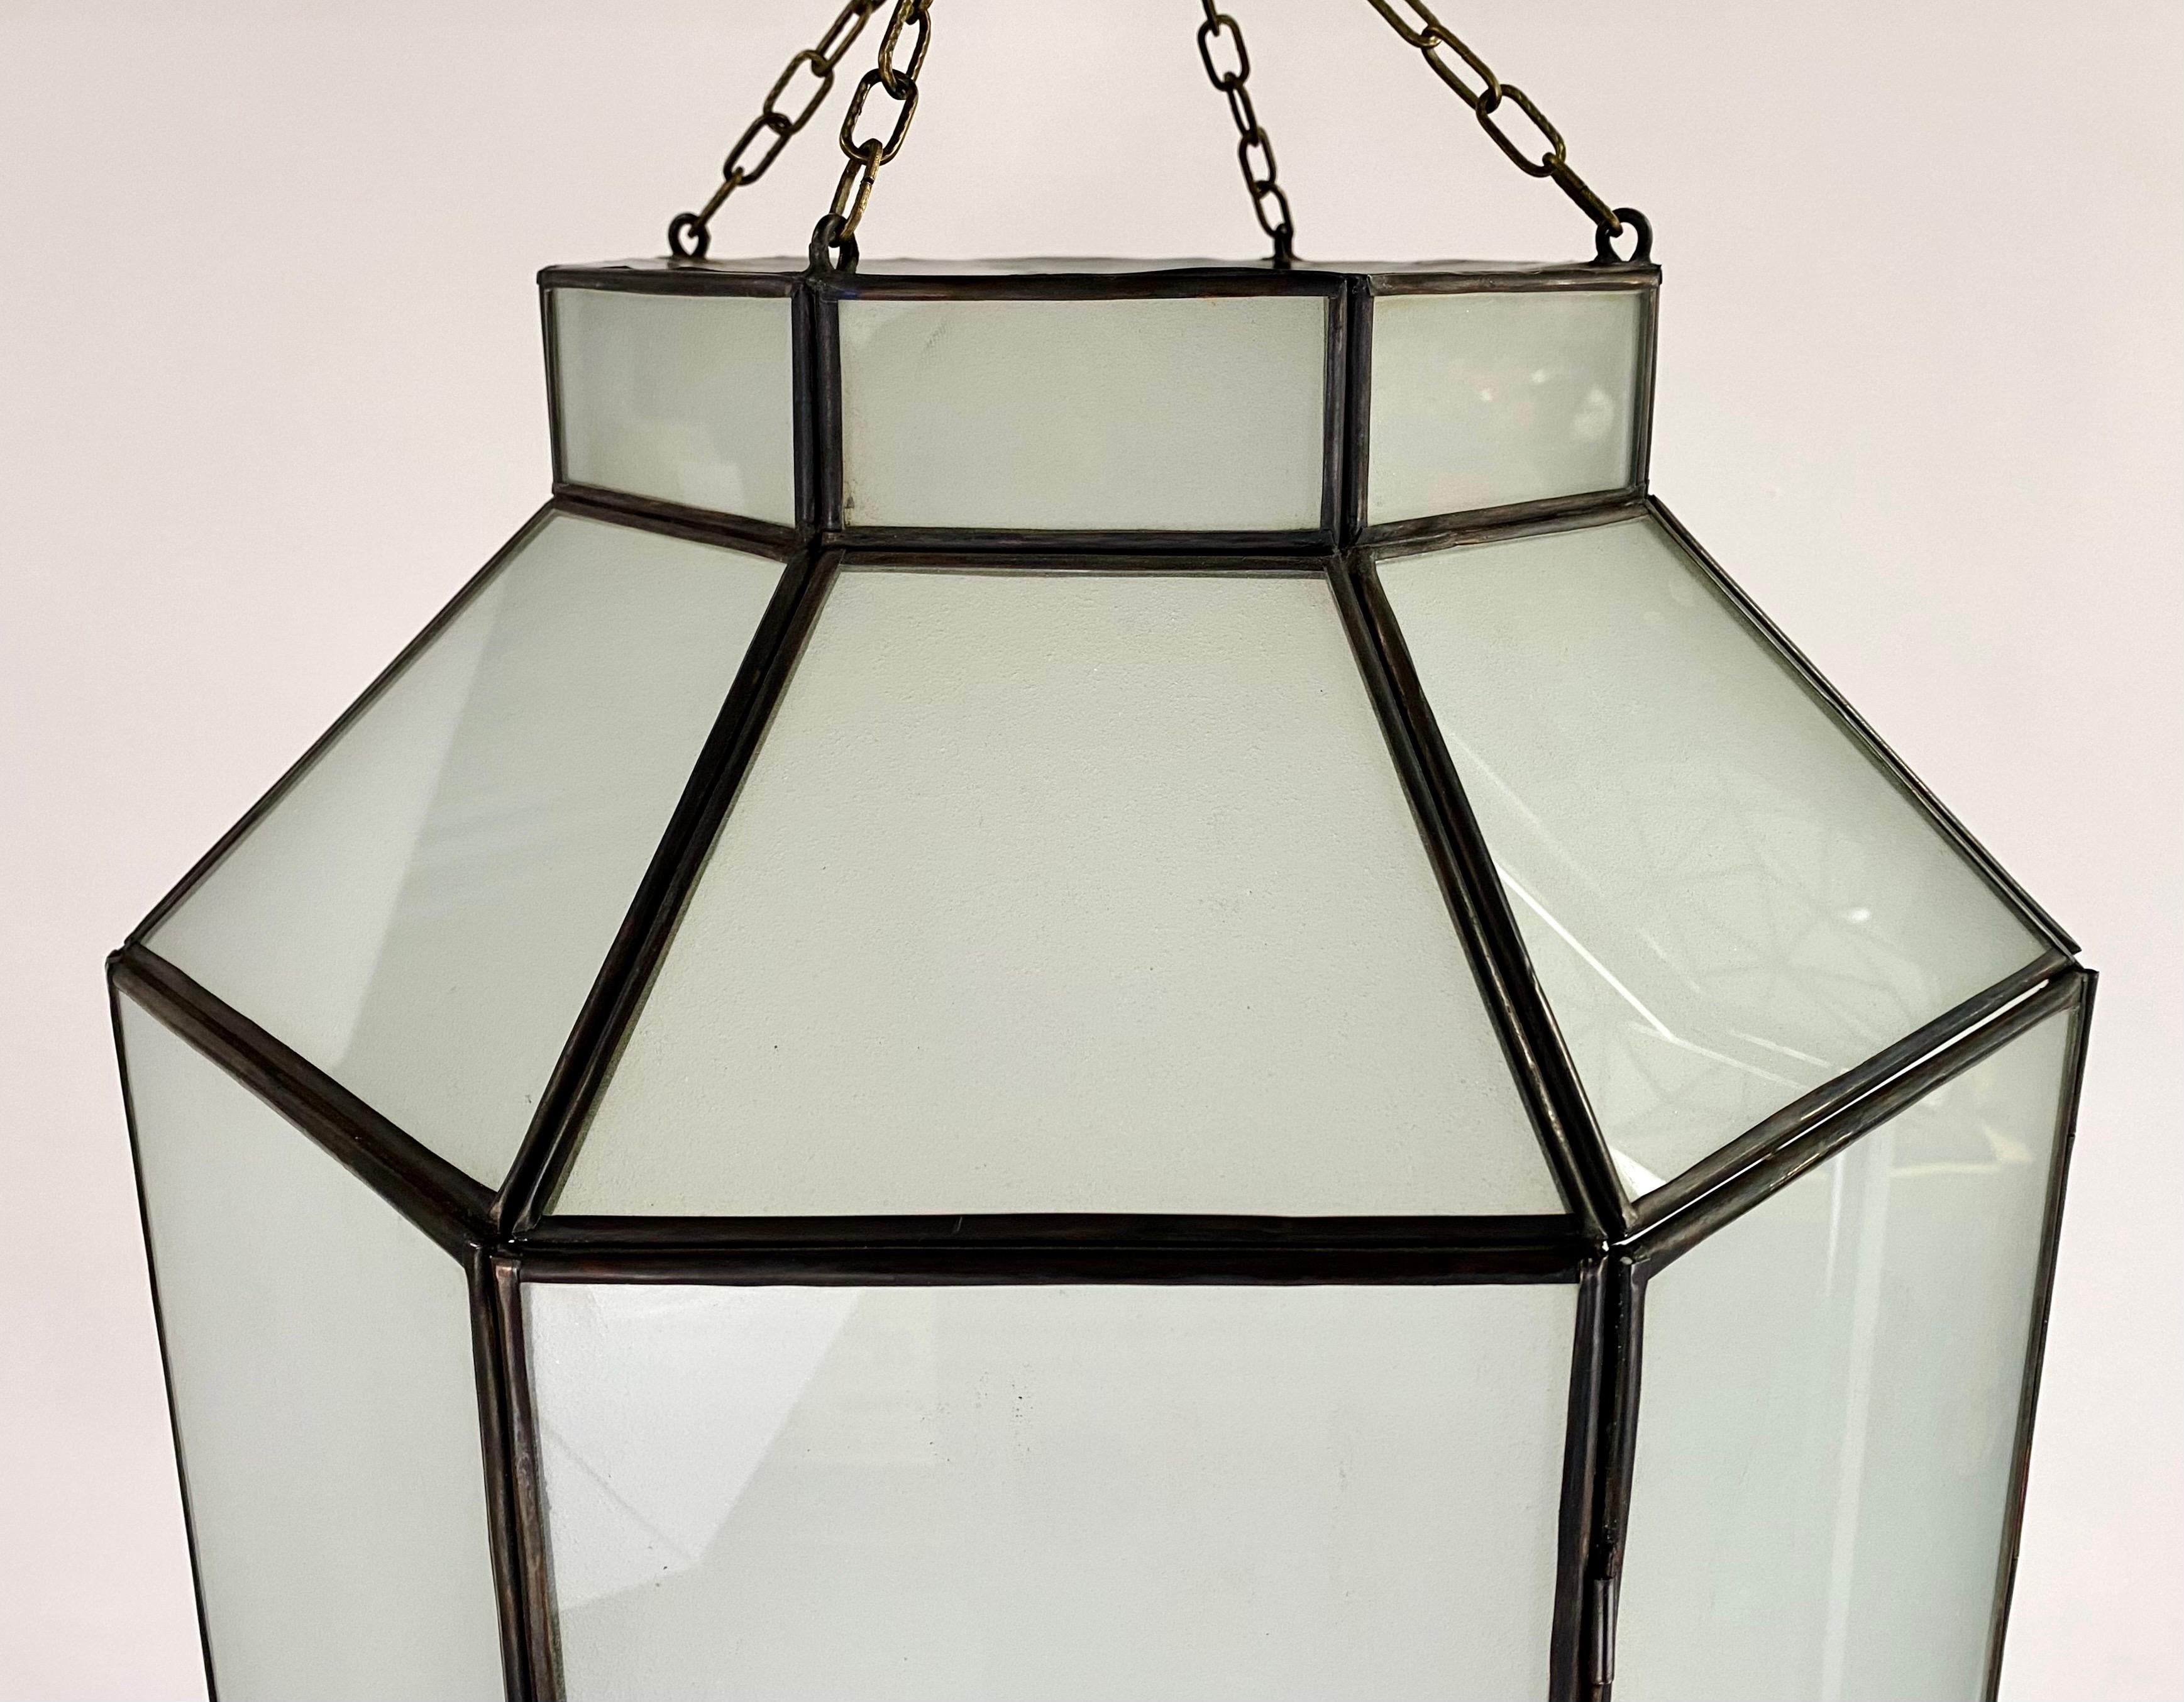 An Art Deco style chandelier, pendant or lantern. Featuring a stylish octagonal shape, the chandelier or pendant is finely hand-made of individual sandblasted frosted milk glass panels and patinated bronze frame. The octagonal shaped pendant has a